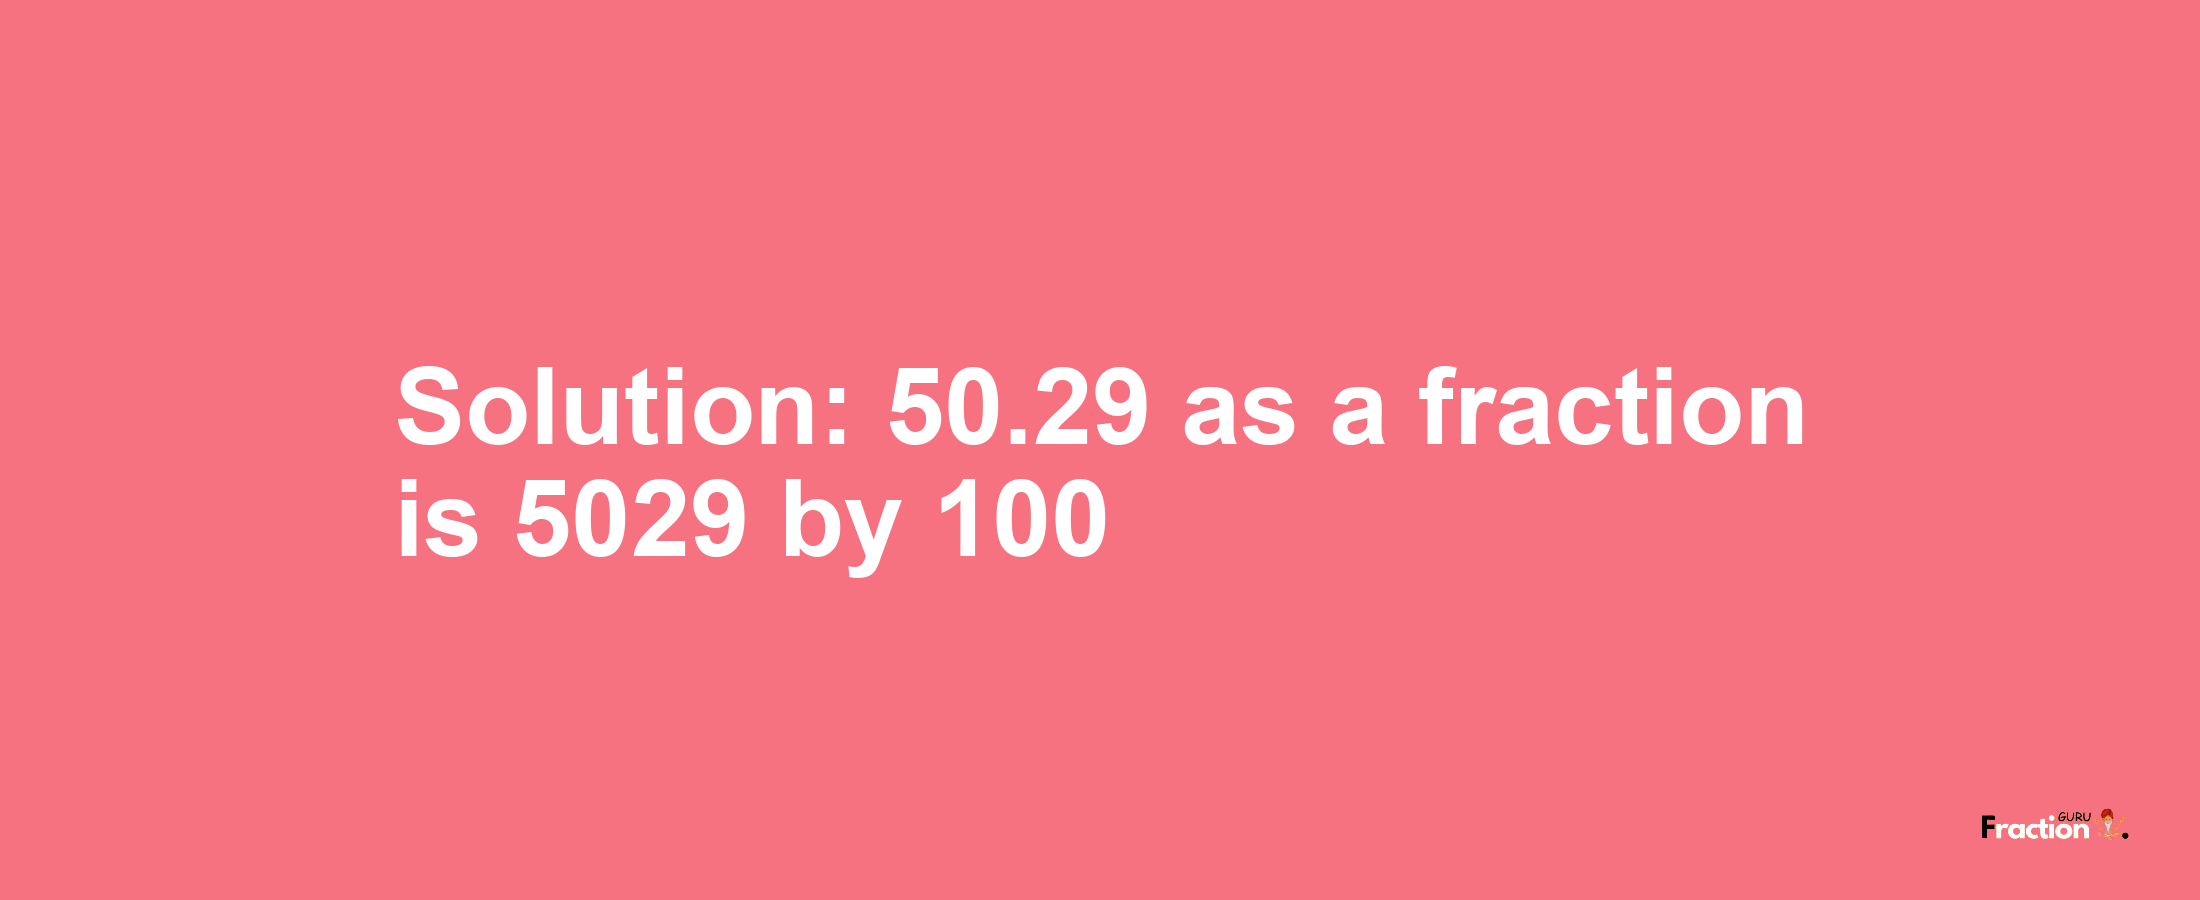 Solution:50.29 as a fraction is 5029/100